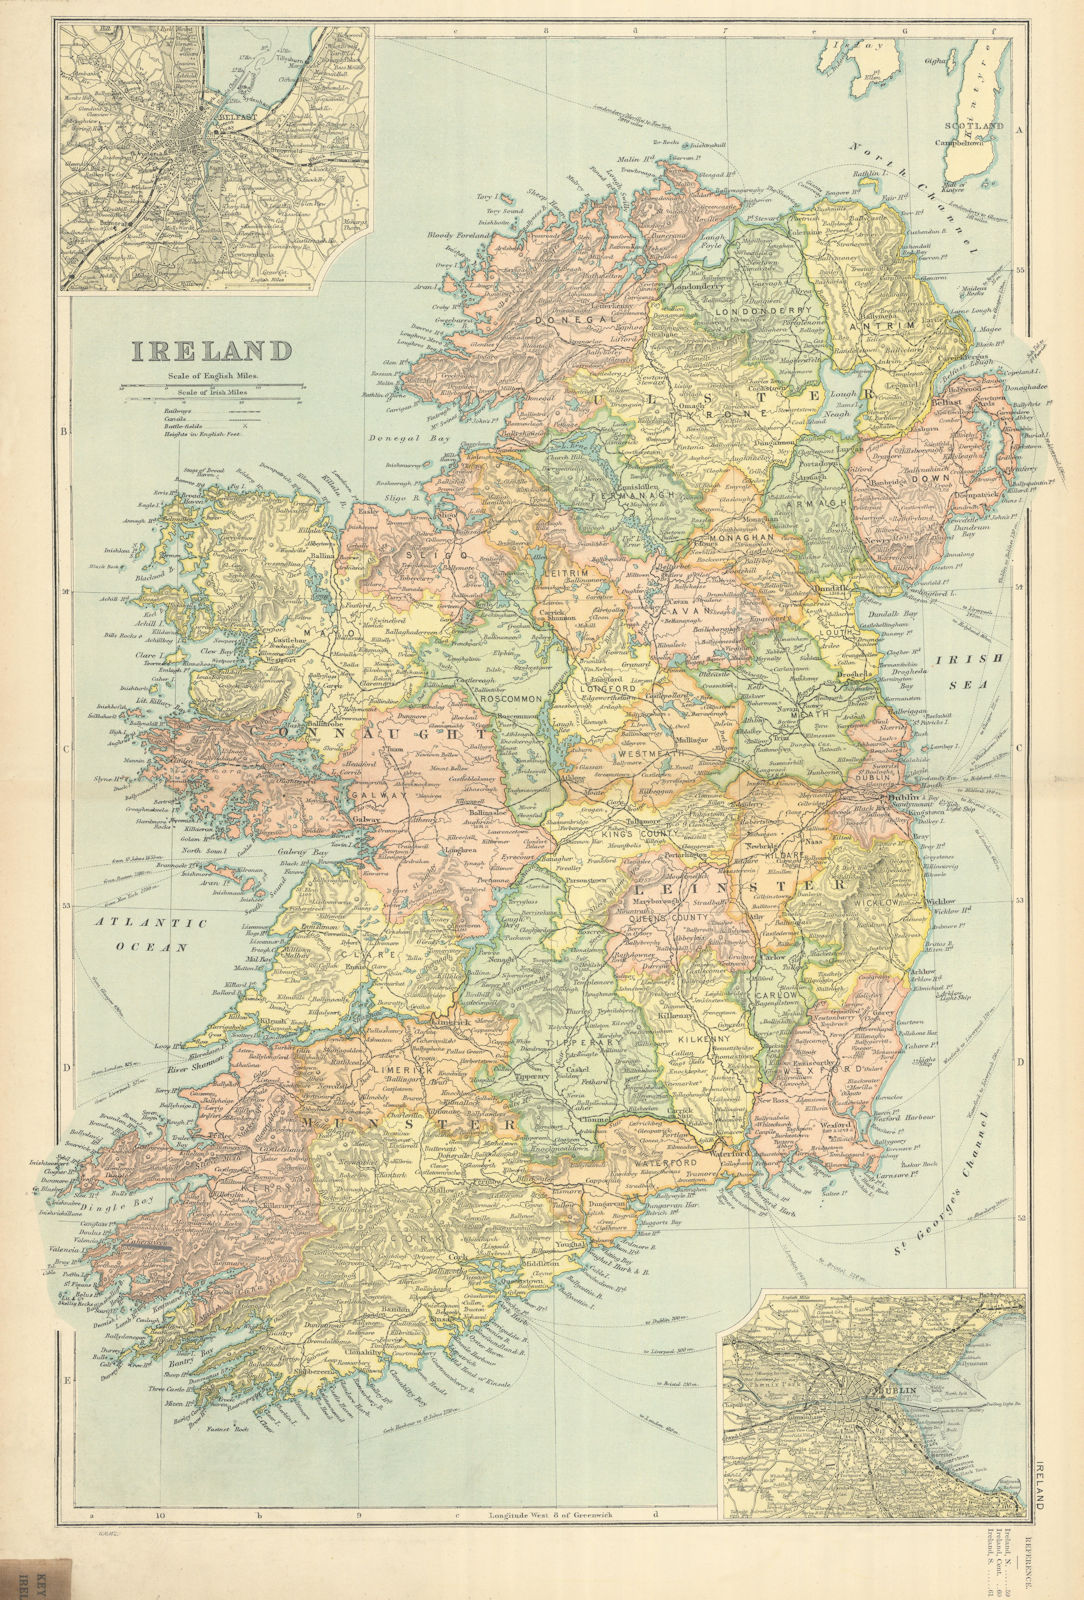 IRELAND in counties. Dublin inset. Antique map by GW BACON 1898 old